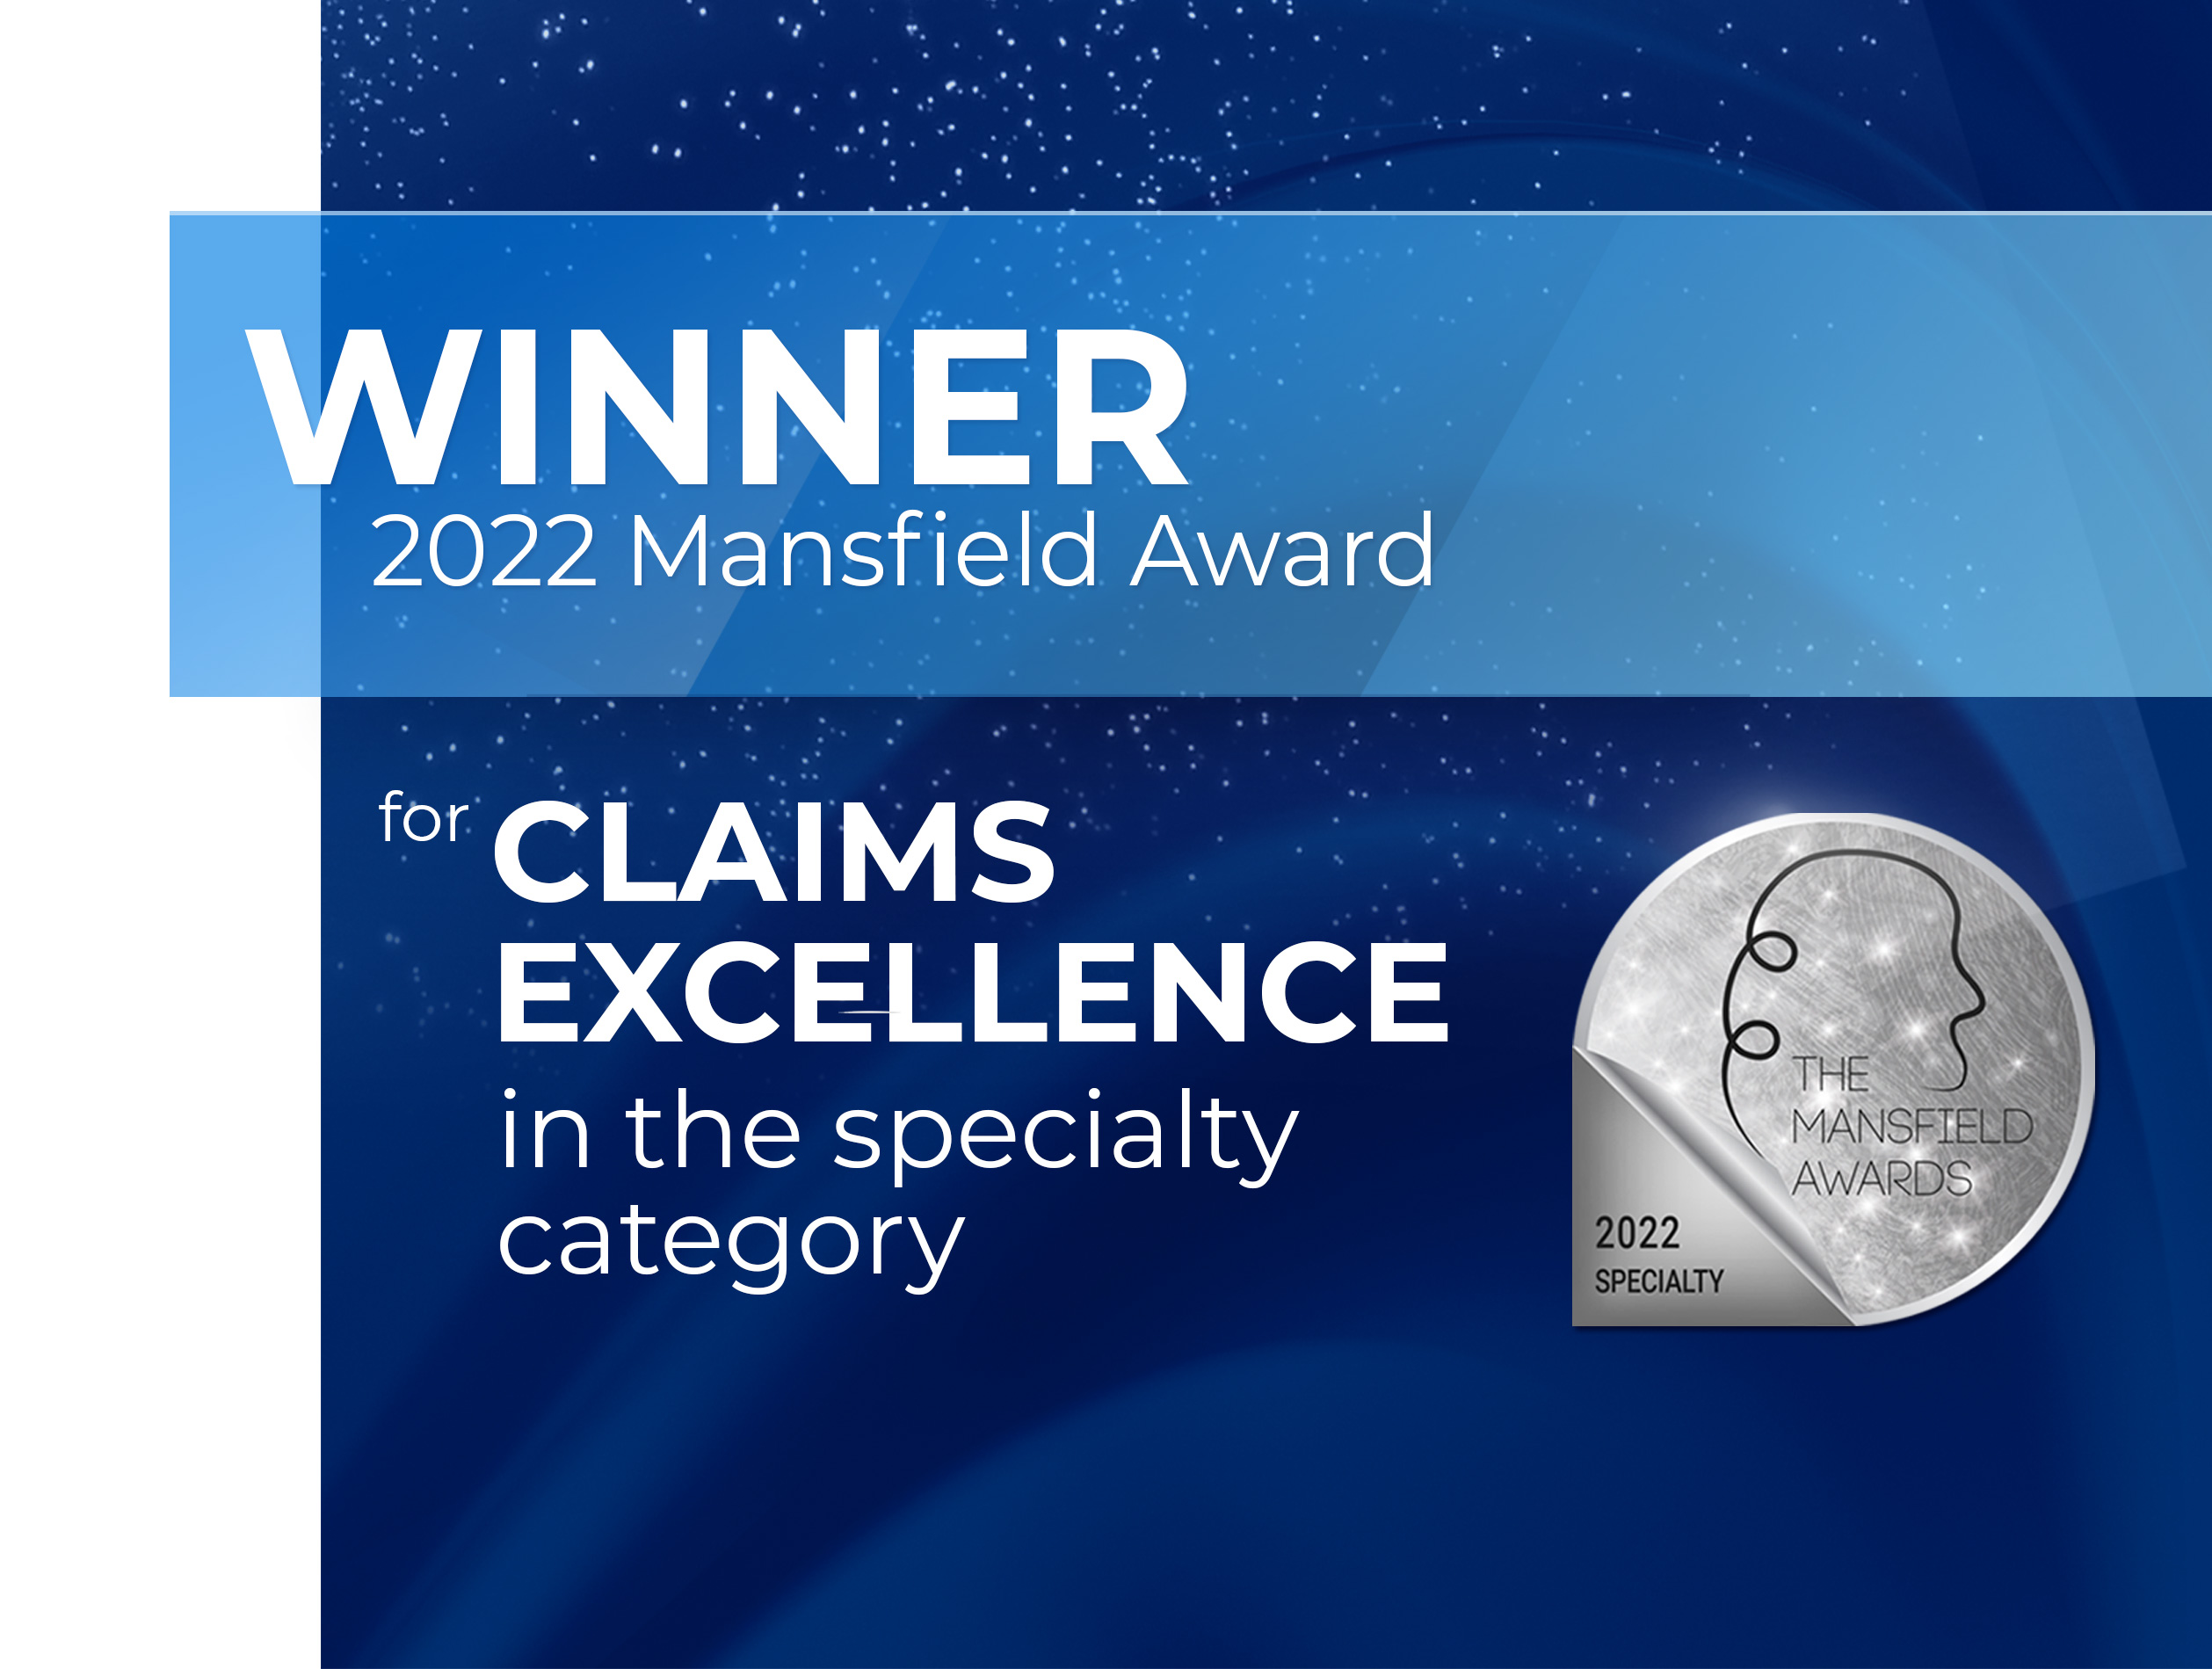 GT INSURANCE NAMED WINNER OF THE MANSFIELD AWARD 2022 IN THE SPECIALTY CATEGORY